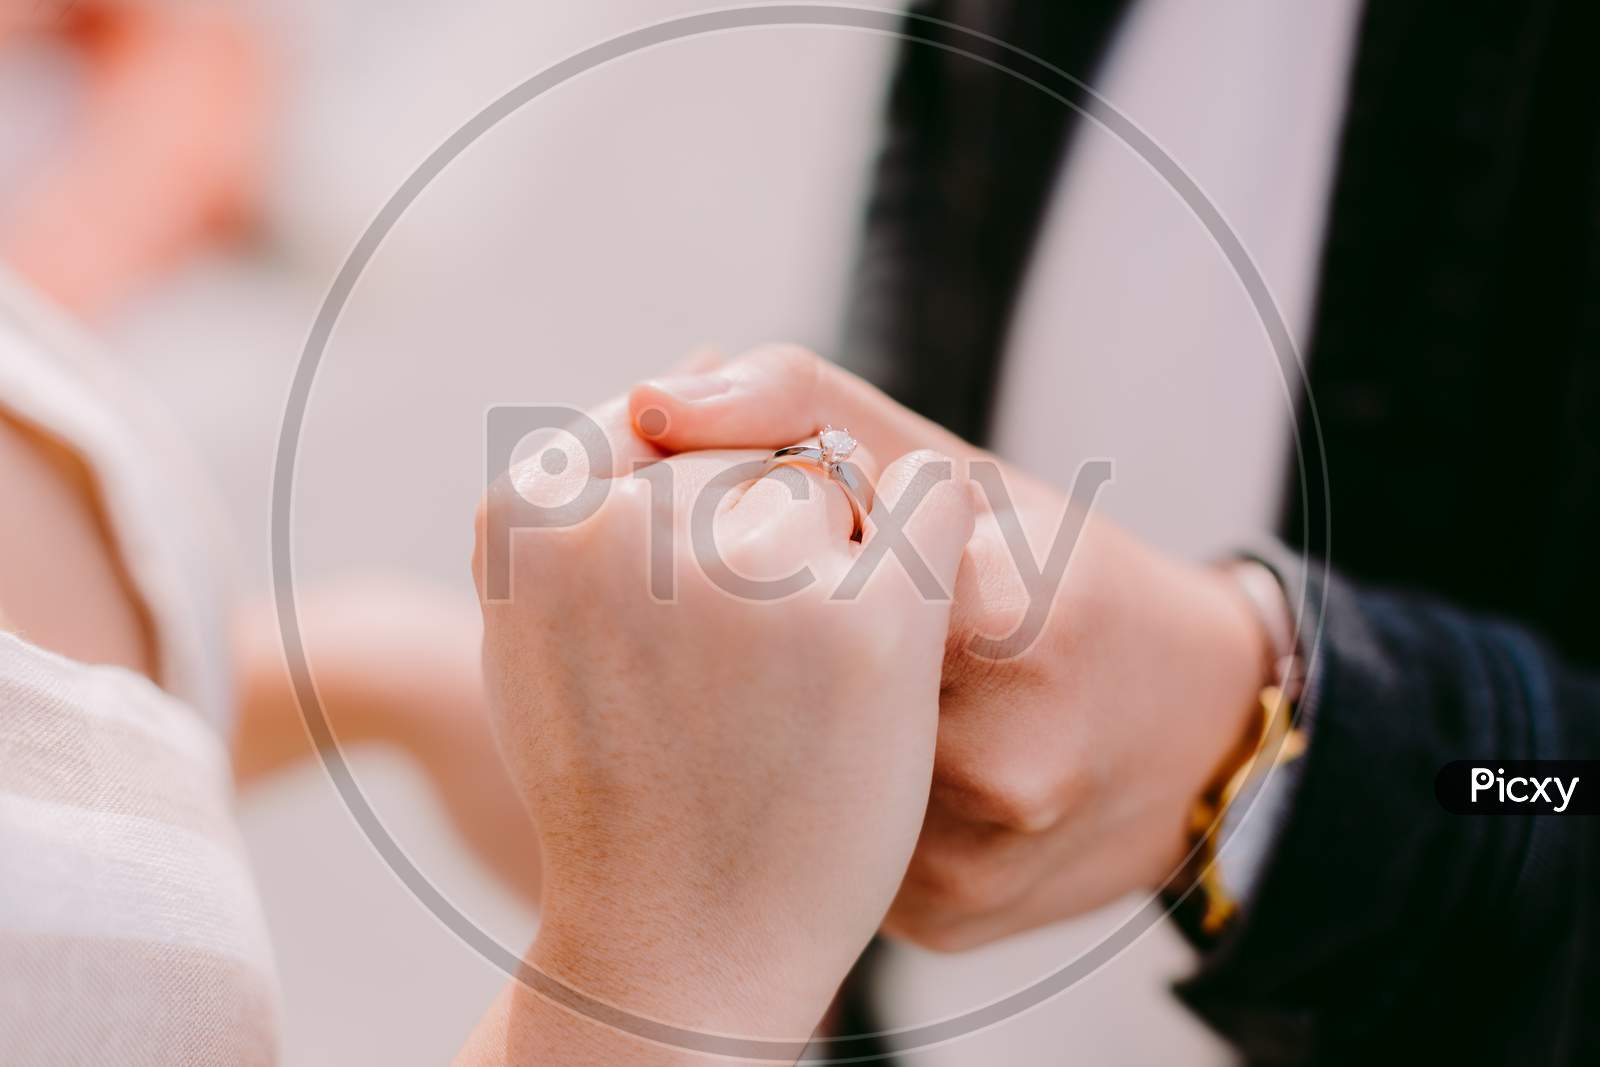 Buy HUG RING two hand to hug symbol ring | 3 ring combo | adjustable love  proposal ring | velantines special ring siver, black, gold color hug ring  combo at Amazon.in